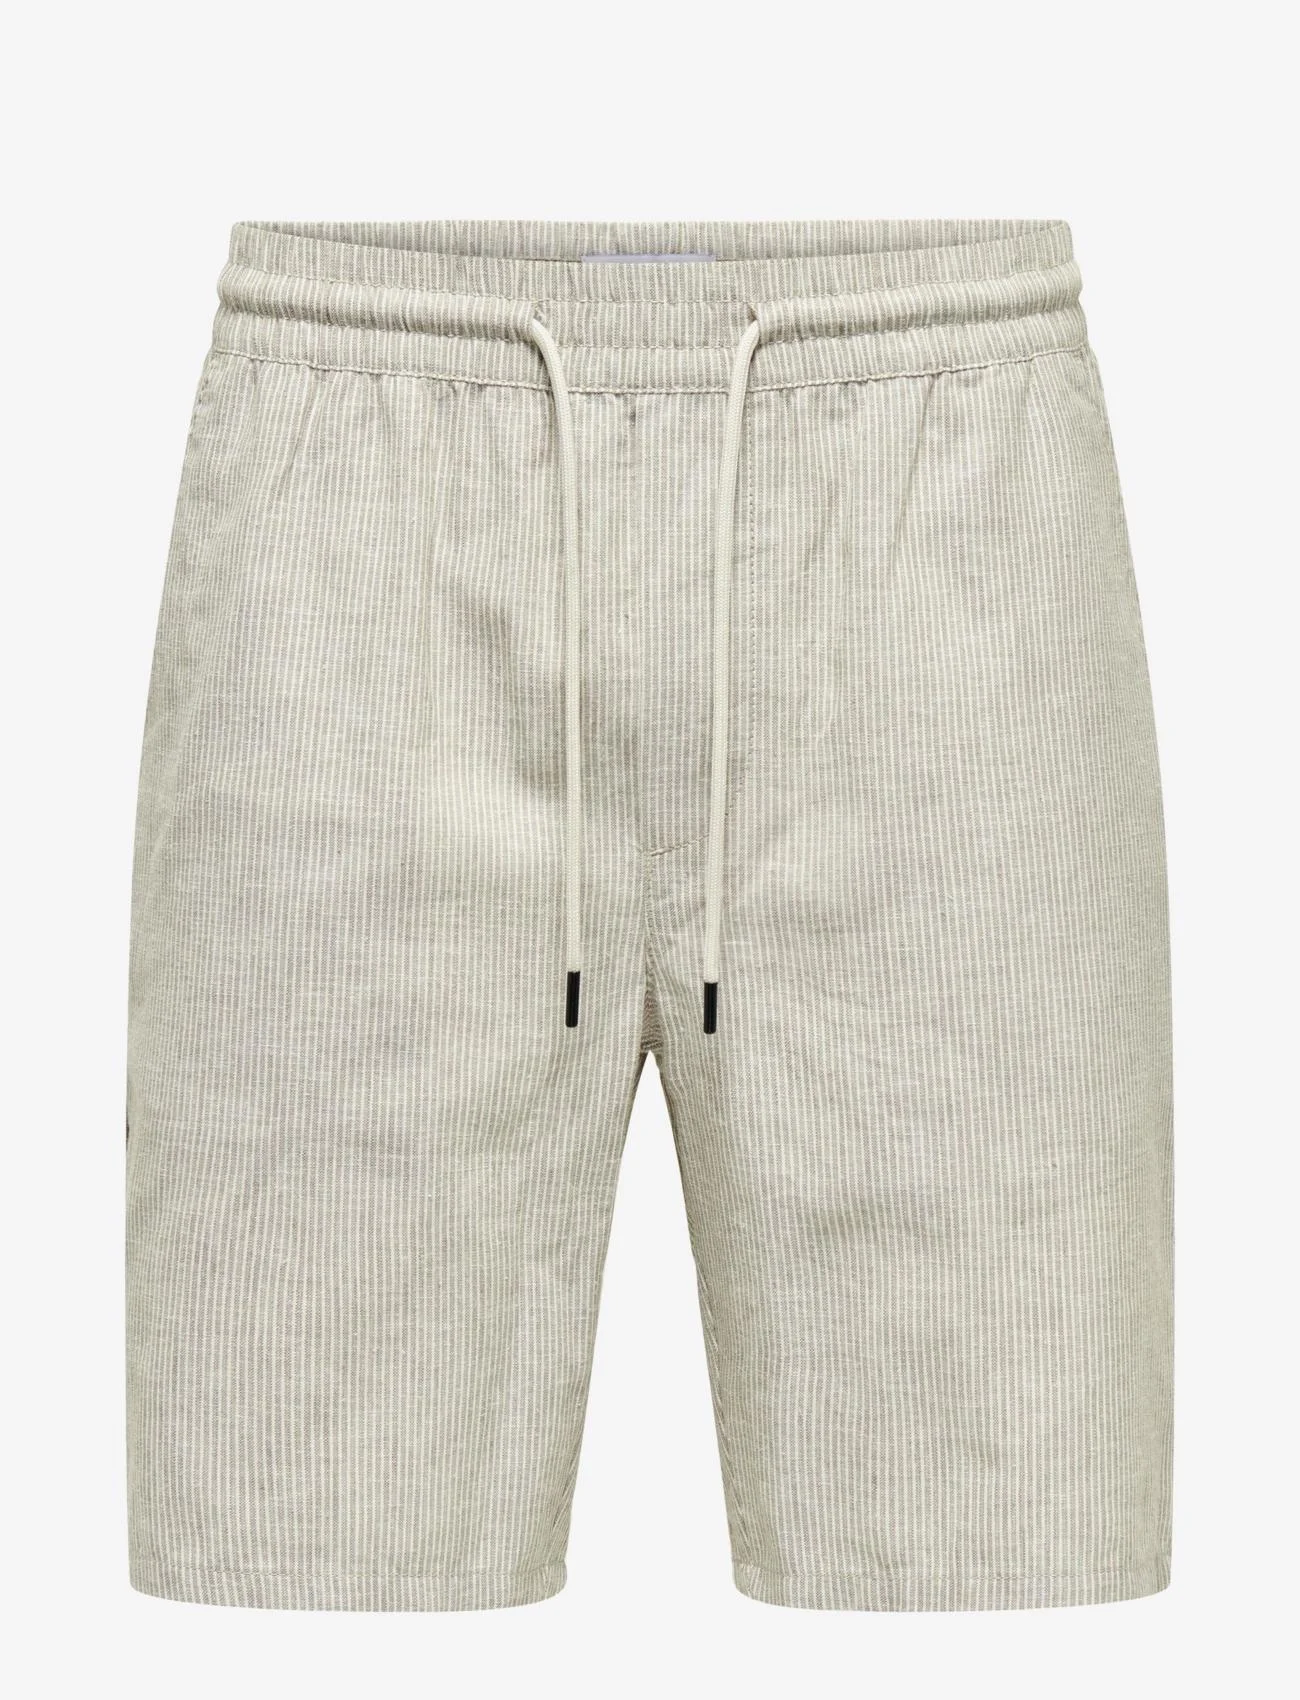 ONLY & SONS - ONSLINUS 0136 COT LIN SHORTS - lowest prices - fallen rock - 0